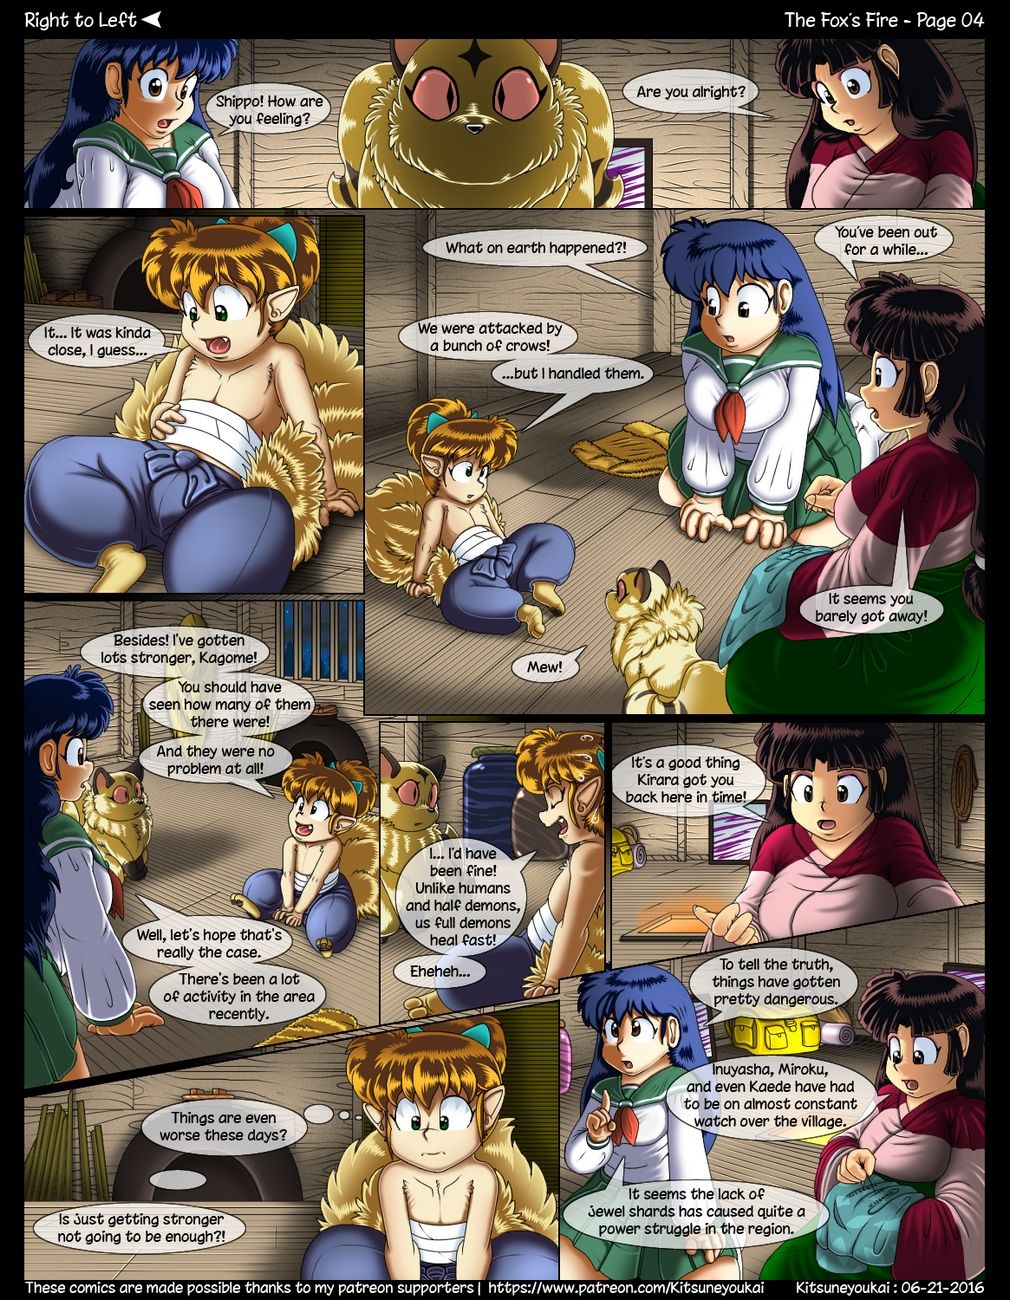 The Fox's Inner Fire page 5